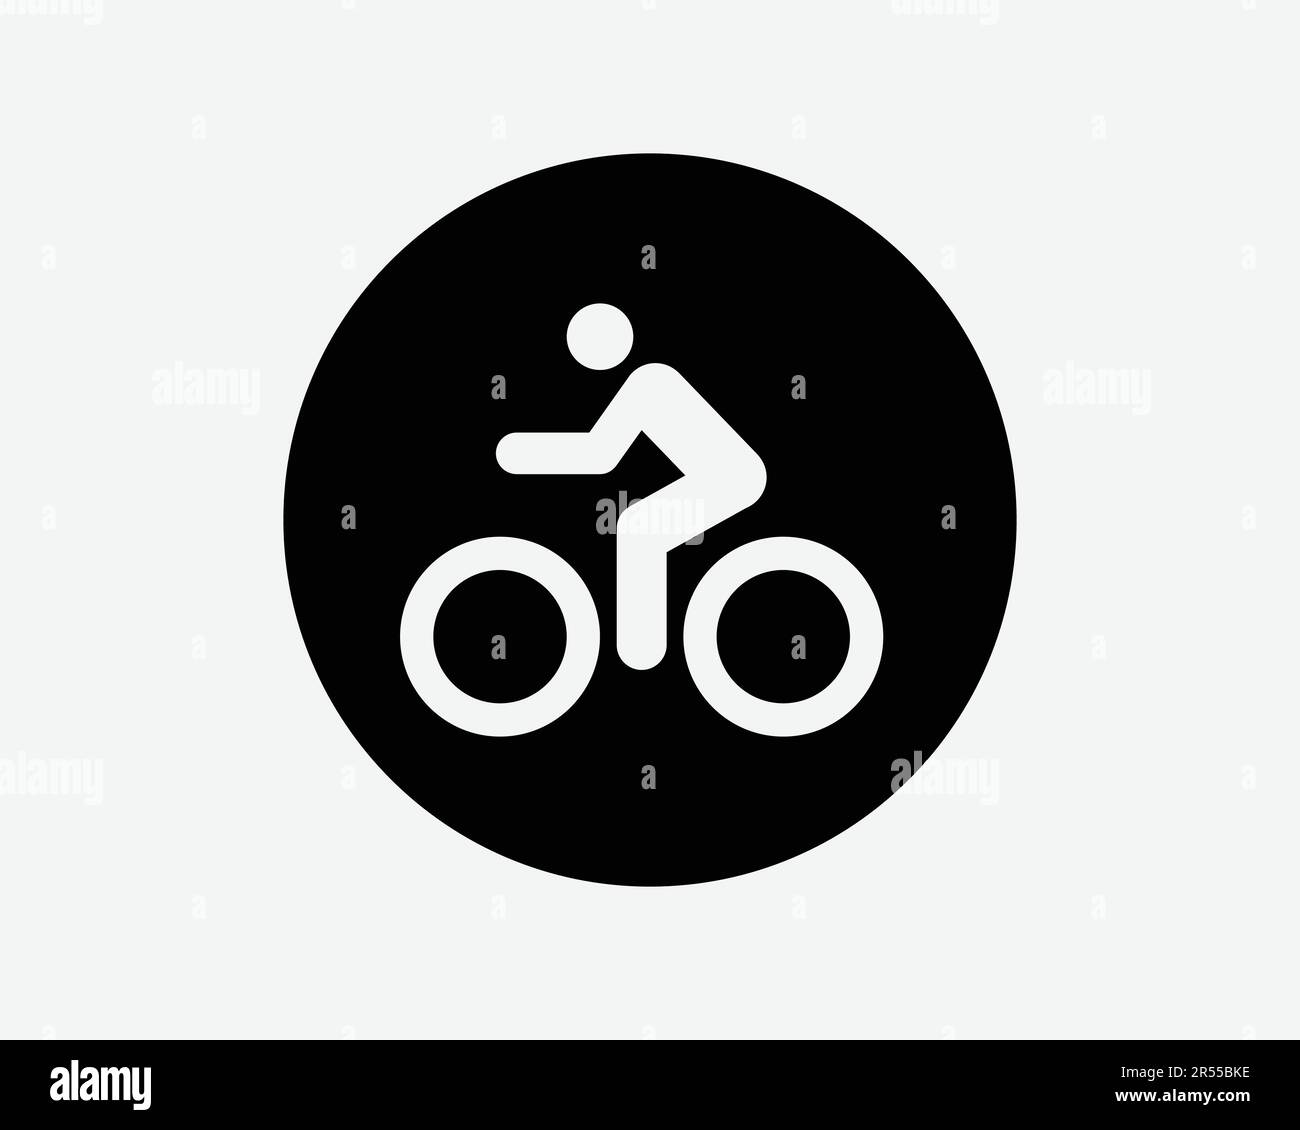 Bike Lane Icon. Bicycle Cycle Cyclist Commuter Biking Sports Exercise Road Traffic Sign Symbol Black Artwork Graphic Illustration Clipart EPS Vector Stock Vector